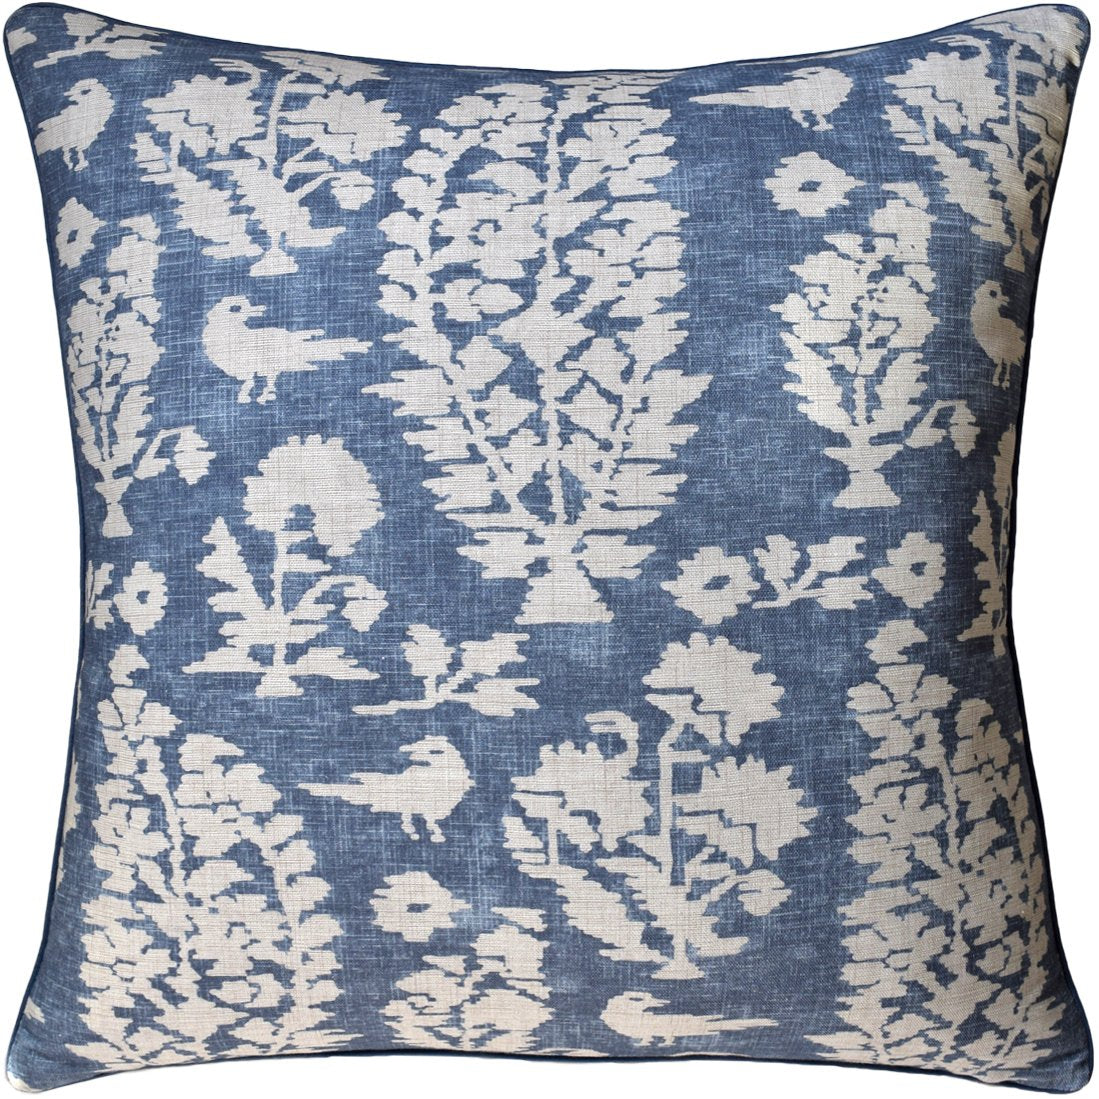 Ryan Studio Allaire Slate Blue Decorative Pillow made from Thibaut Fabric - Chestnut Hill Collection